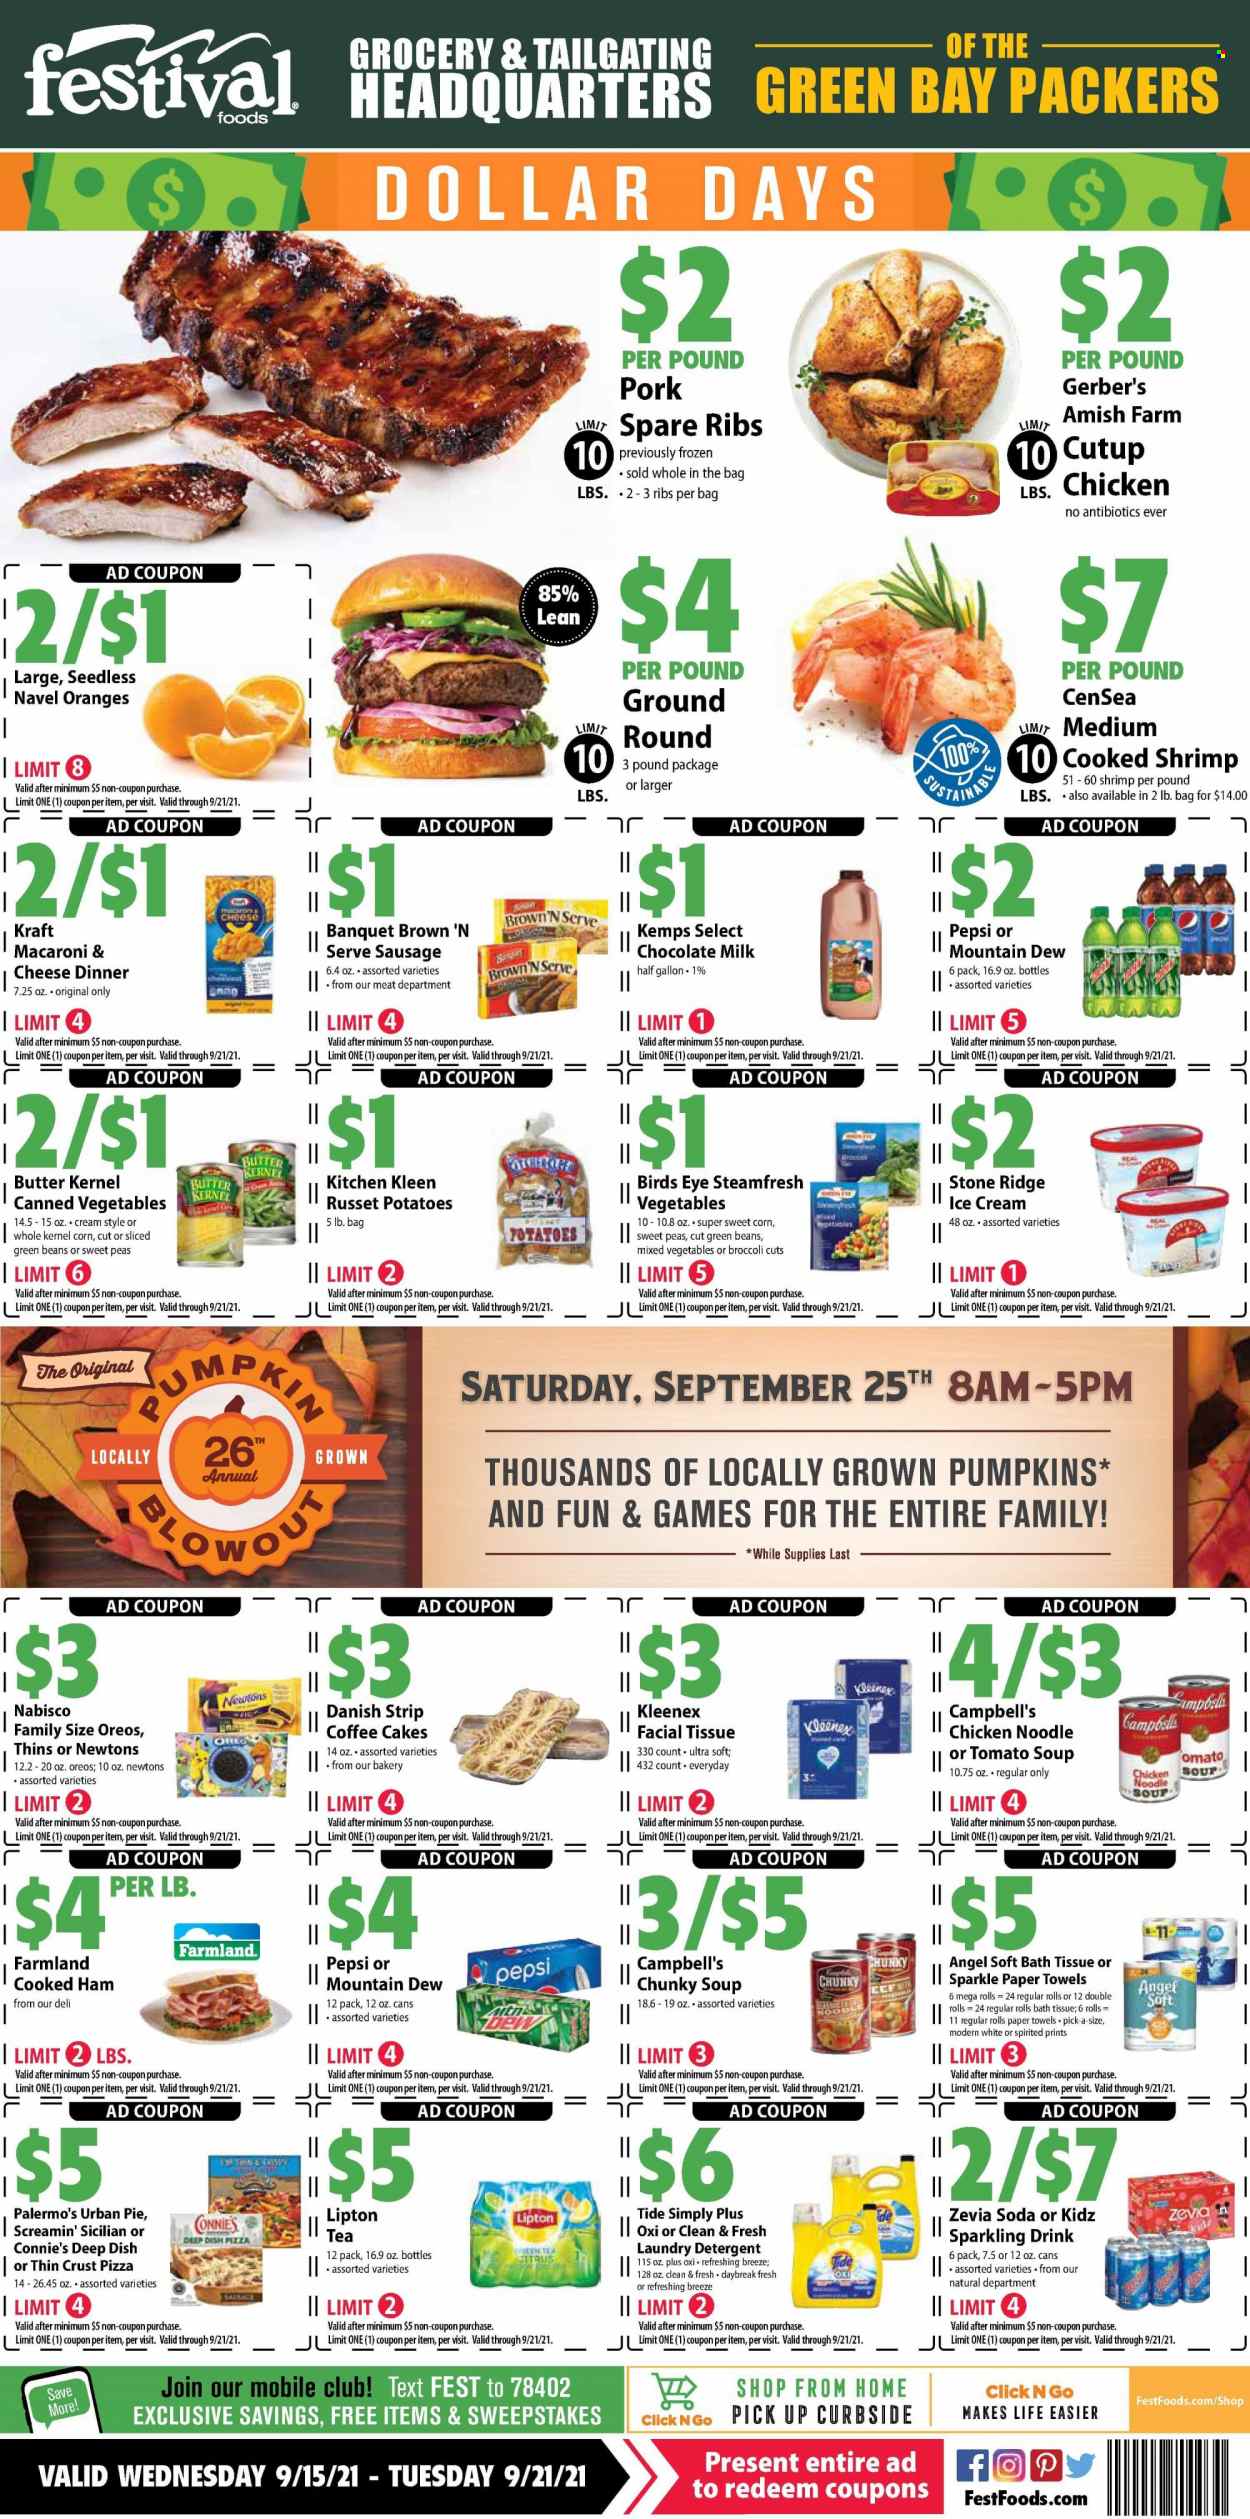 thumbnail - Festival Foods Flyer - 09/15/2021 - 09/21/2021 - Sales products - cake, broccoli, corn, green beans, russet potatoes, potatoes, pumpkin, sweet corn, oranges, shrimps, Campbell's, tomato soup, pizza, macaroni, soup, Urban Pie, noodles cup, Bird's Eye, noodles, Kraft®, cooked ham, ham, sausage, Kemps, Oreo, milk, butter, ice cream, mixed vegetables, Screamin' Sicilian, milk chocolate, Thins, canned vegetables, Mountain Dew, Pepsi, Lipton, soda, tea, pork spare ribs, bath tissue, Kleenex, kitchen towels, paper towels, detergent, Tide, laundry detergent, navel oranges. Page 1.